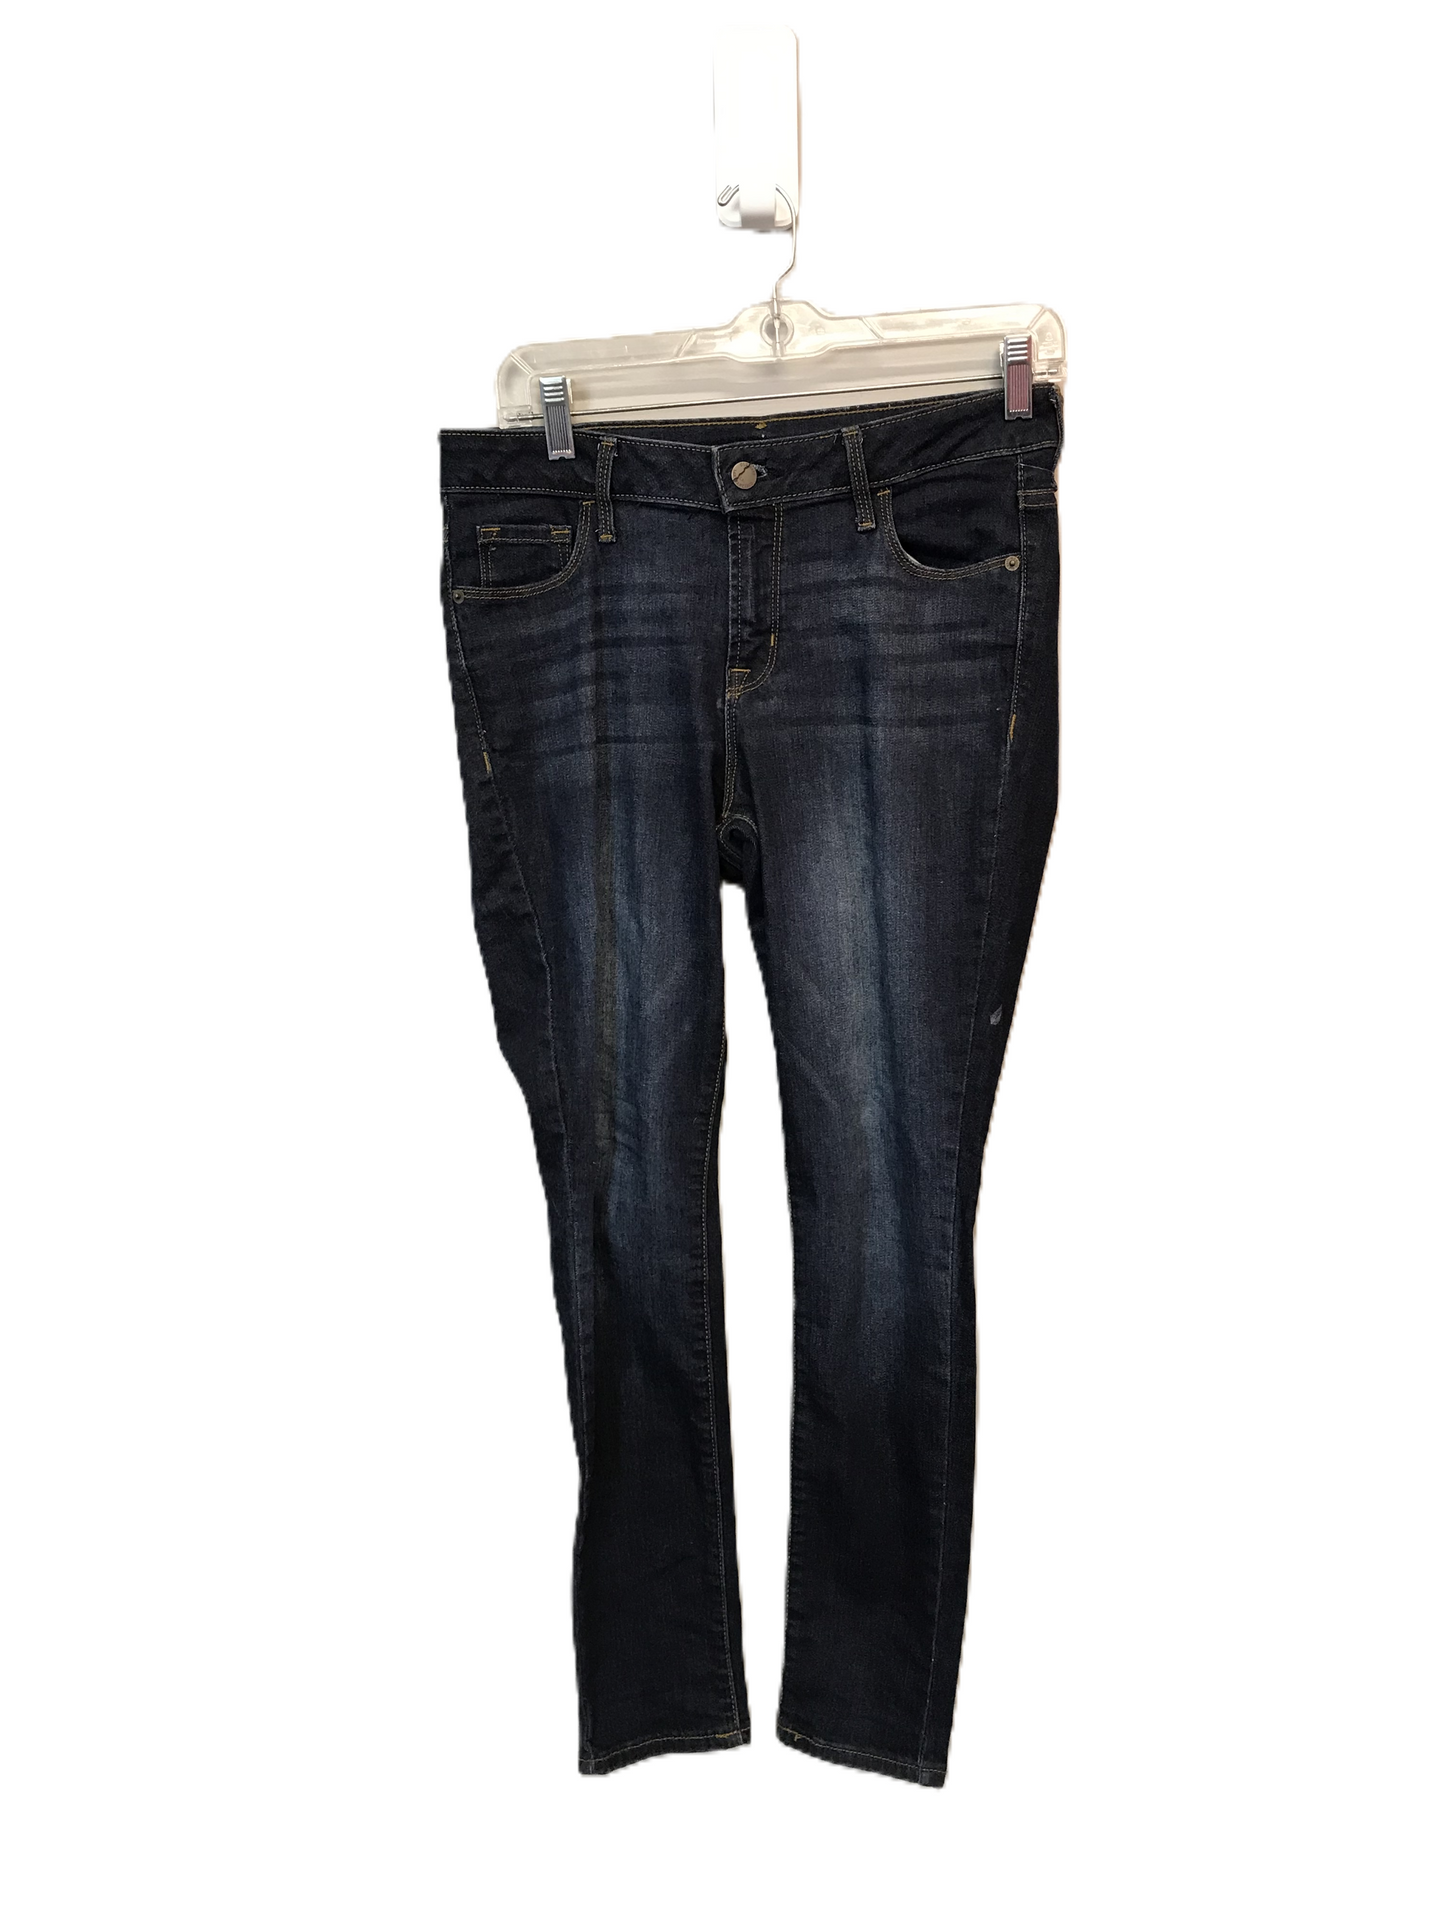 Jeans Skinny By Old Navy  Size: 6